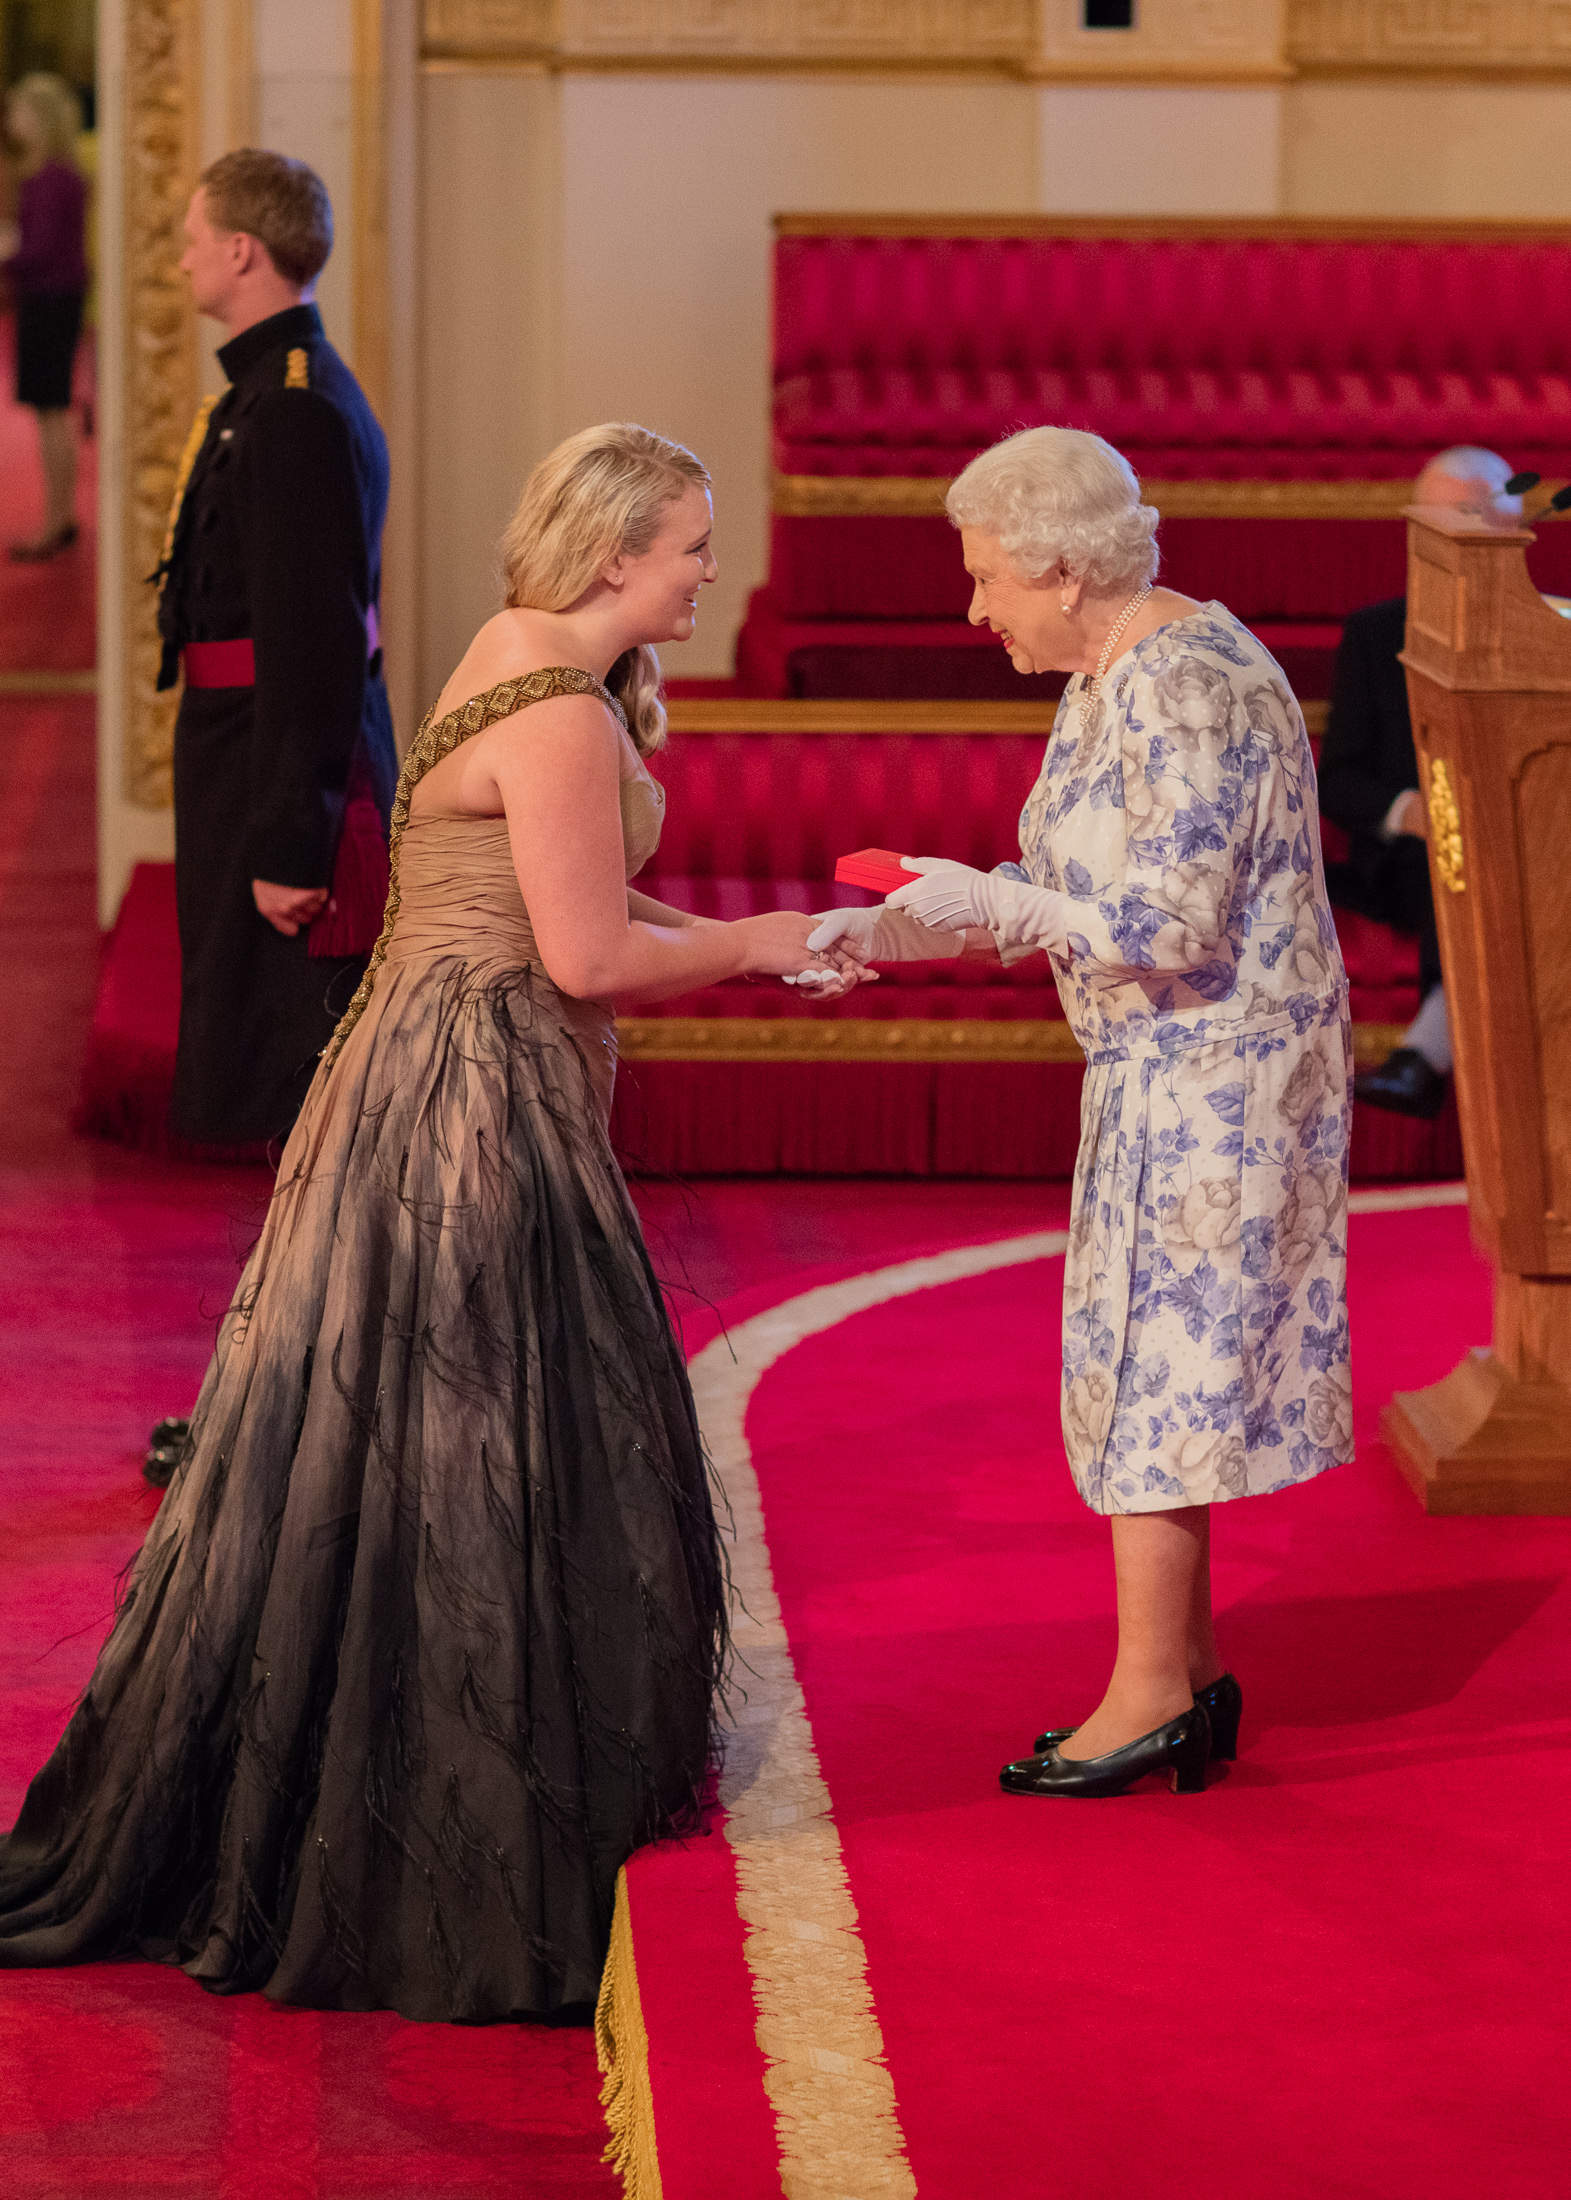 Jessica Dewhurst 2016 Queen's Young Leader